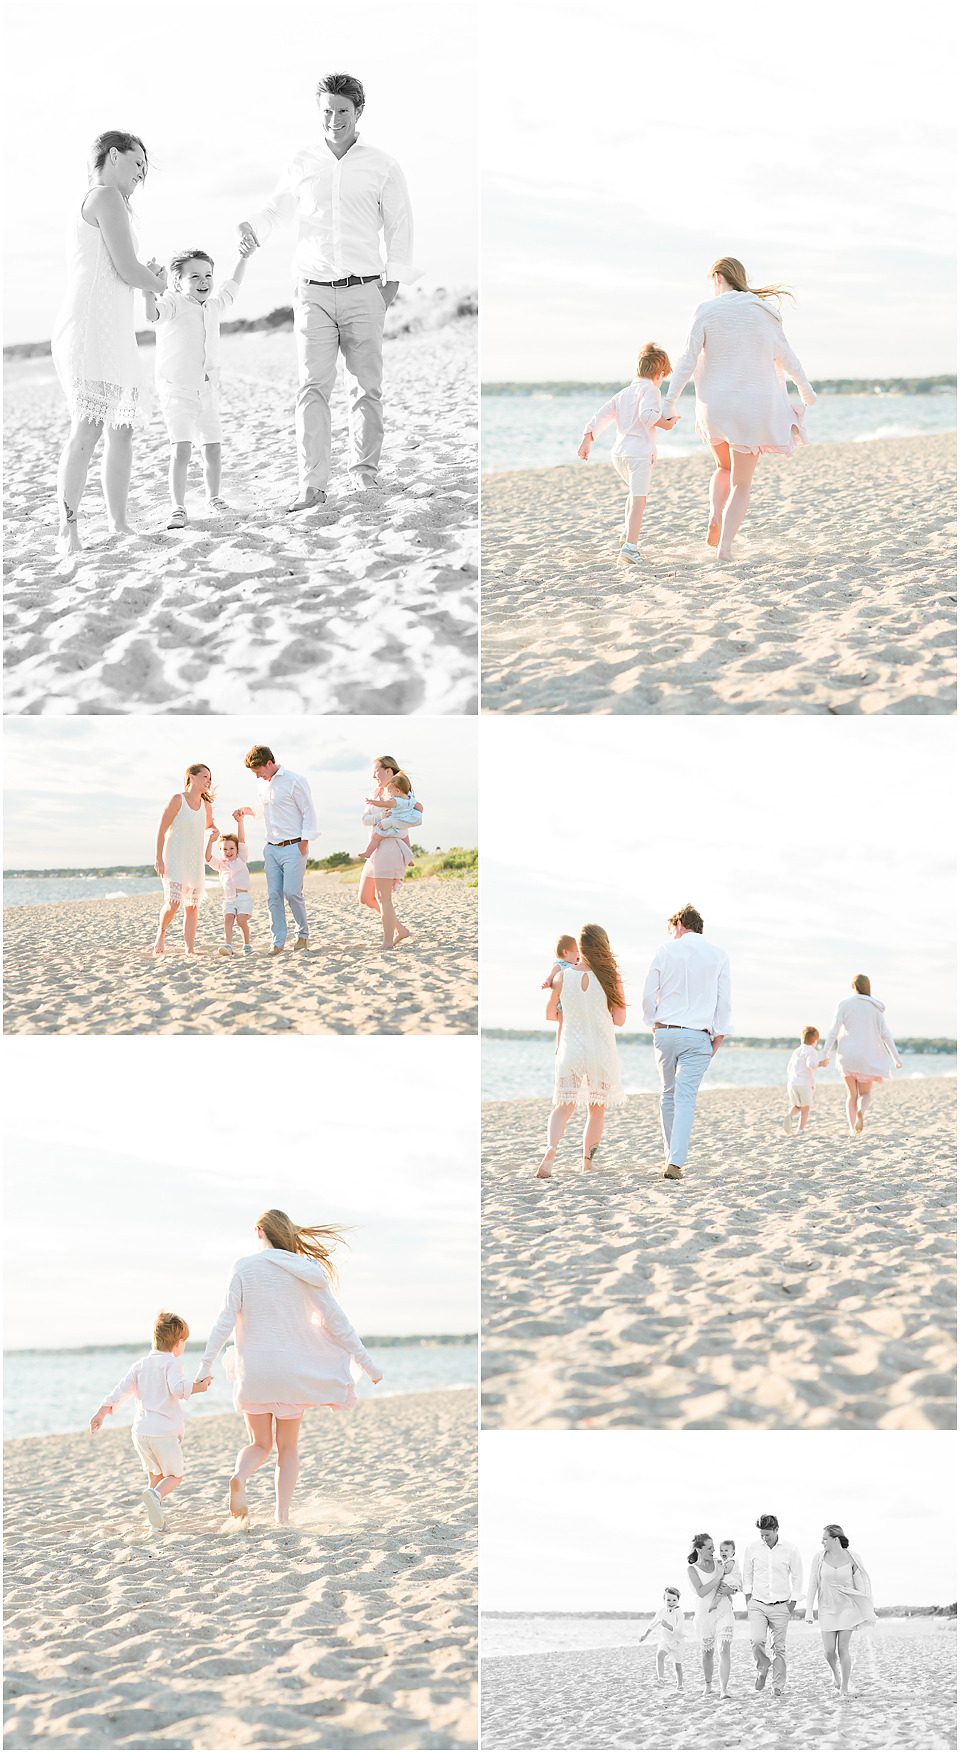 Best Family Photographers in CT | Family Beach Portraits | CT Family Photographers | Family Beach Session | Connecticut Photographers | www.kellidease.com